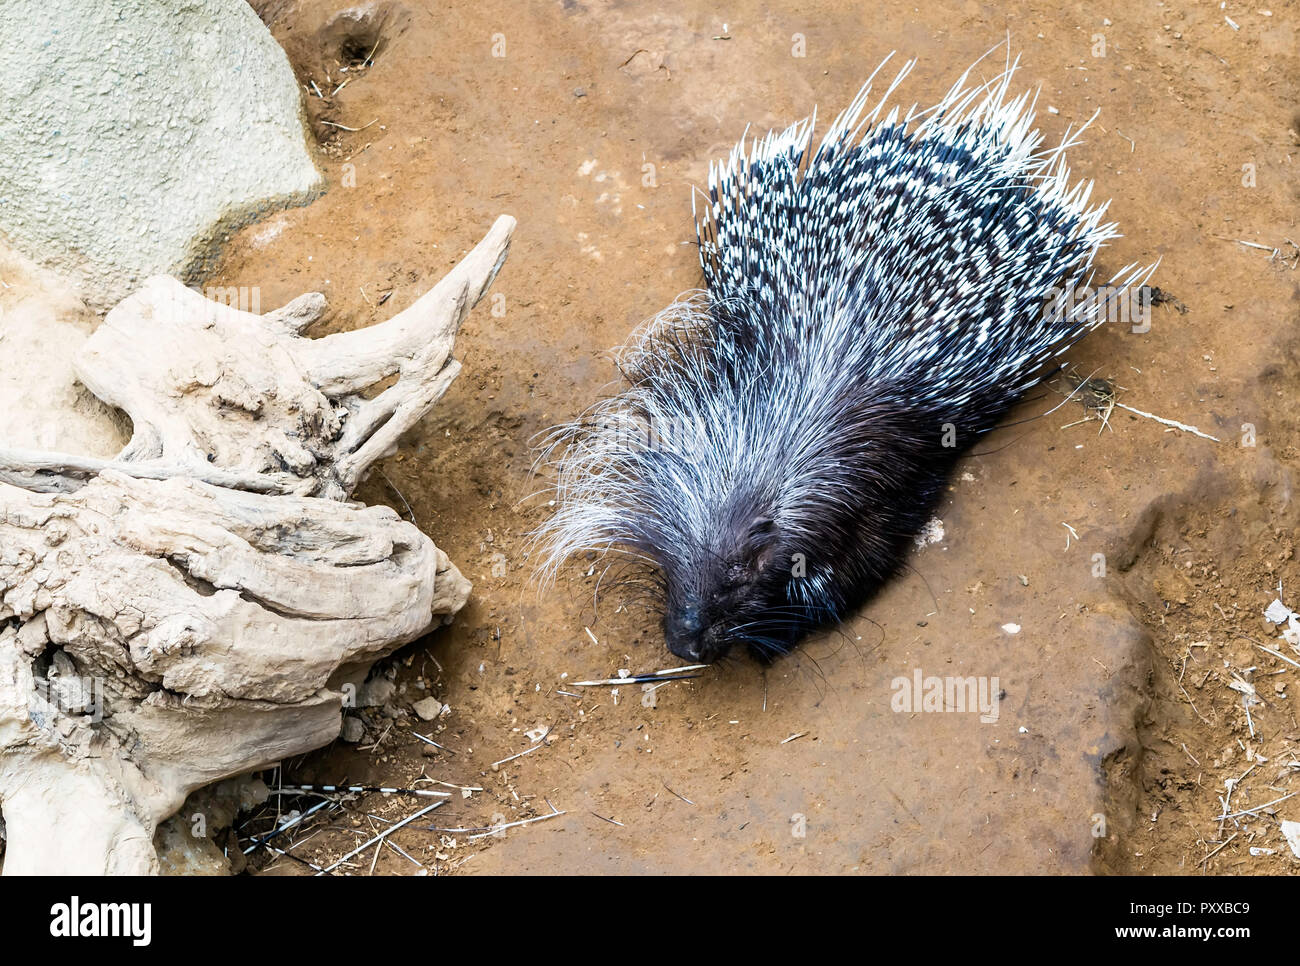 Cape porcupine or South African porcupine (Hystrix africaeaustralis) is a species native to central and southern Africa. Stock Photo